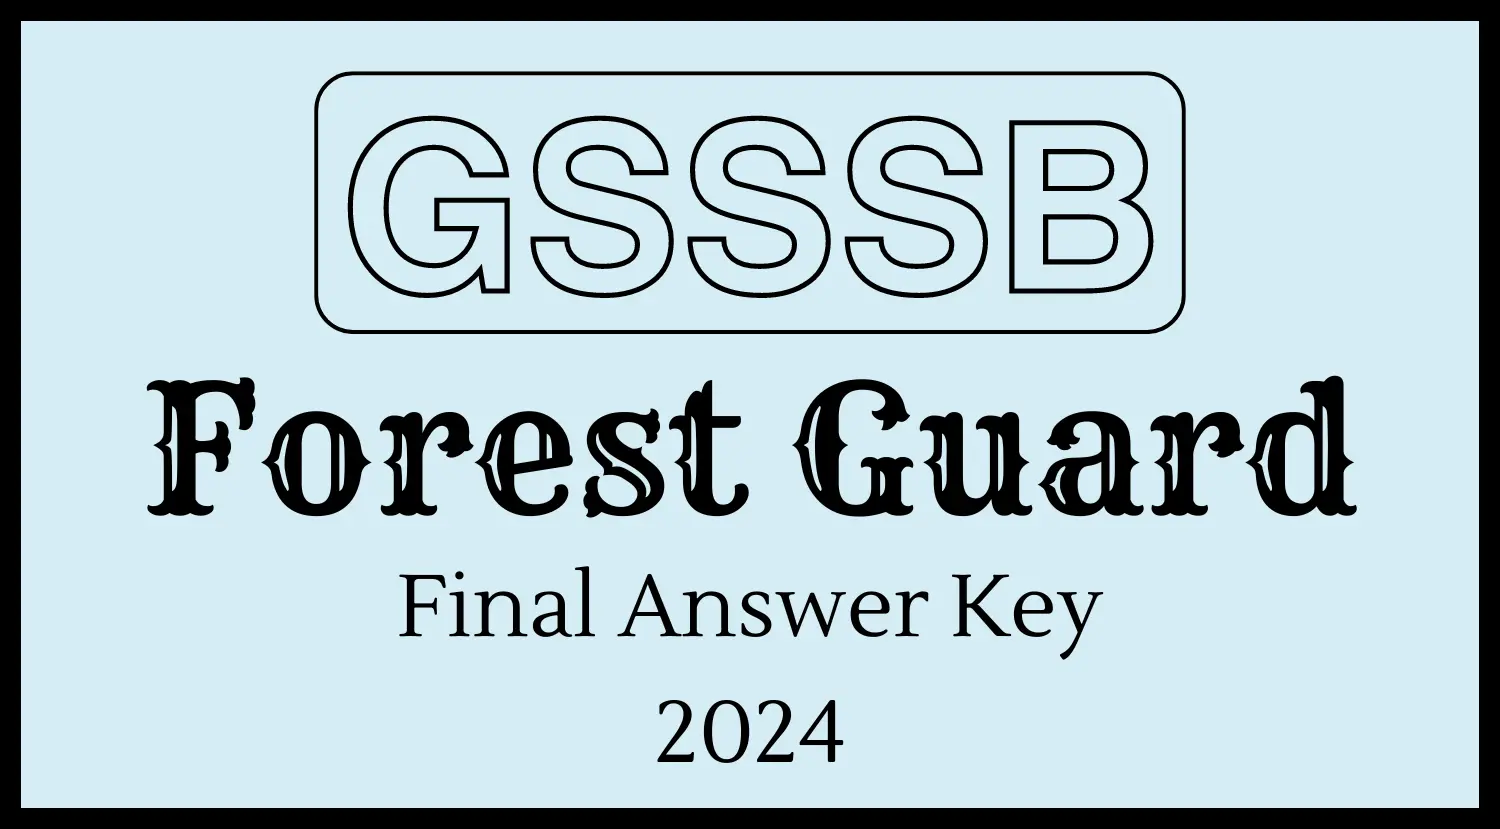 GSSSB Forest Guard Final Answer Key 2024 Released Check Now